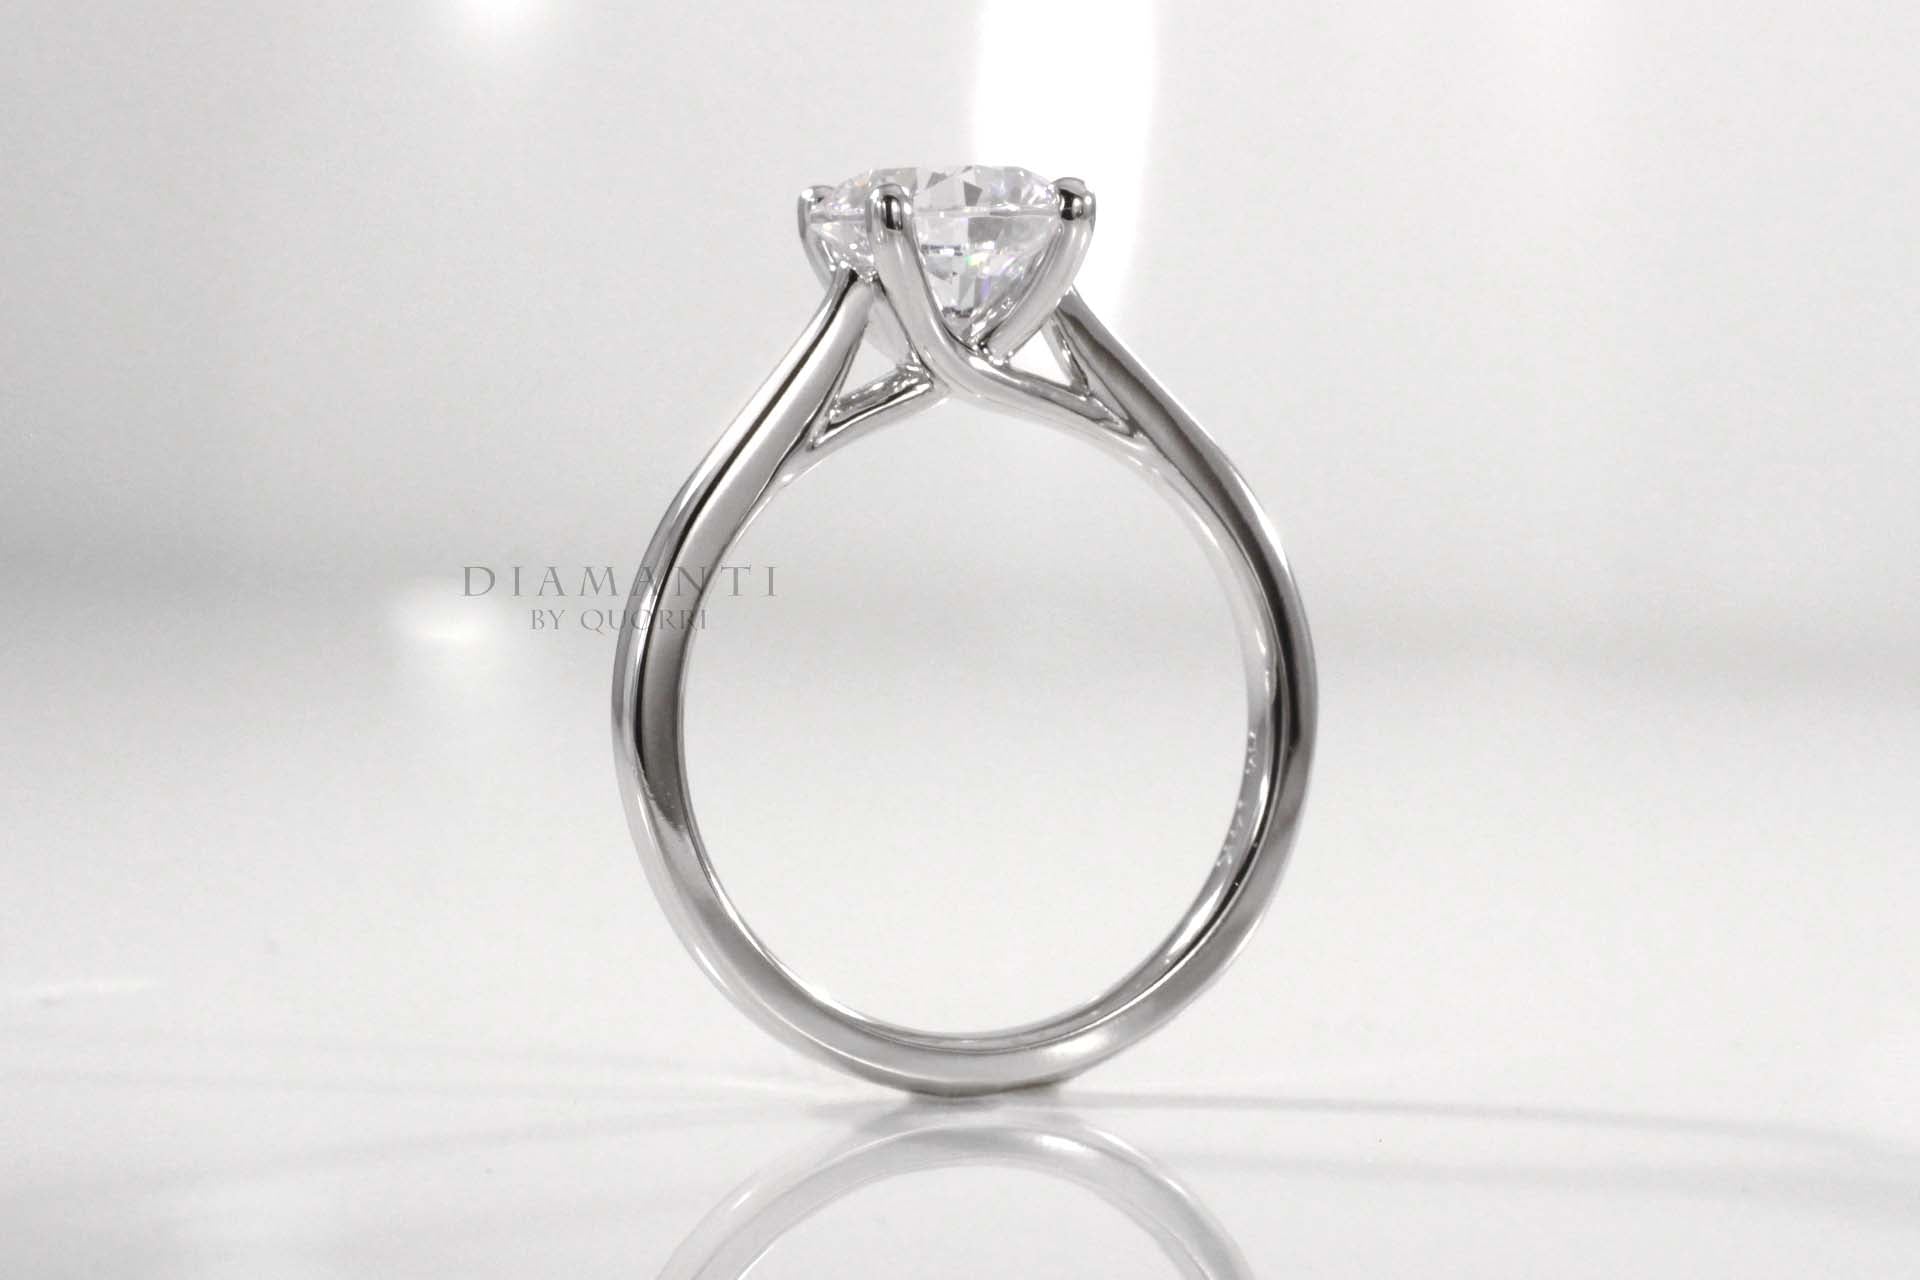 petite diamond solitaire ring in yellow gold made in canada